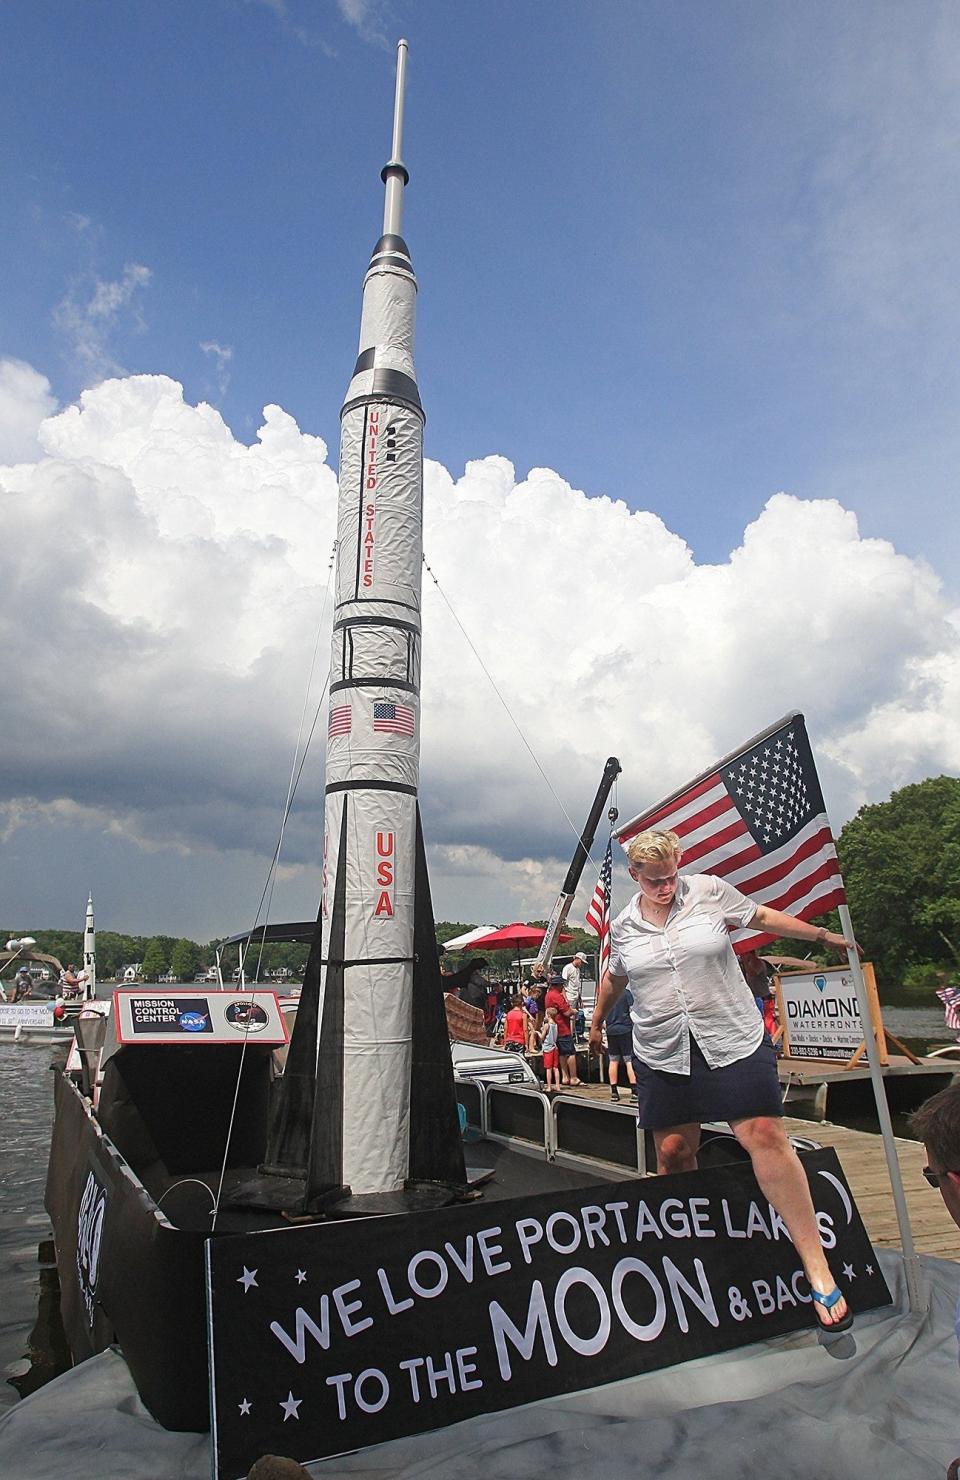 Katy Boyle steps down from her Apollo 11-themed boat after the 2019 boat parade at Portage Lakes State Park.